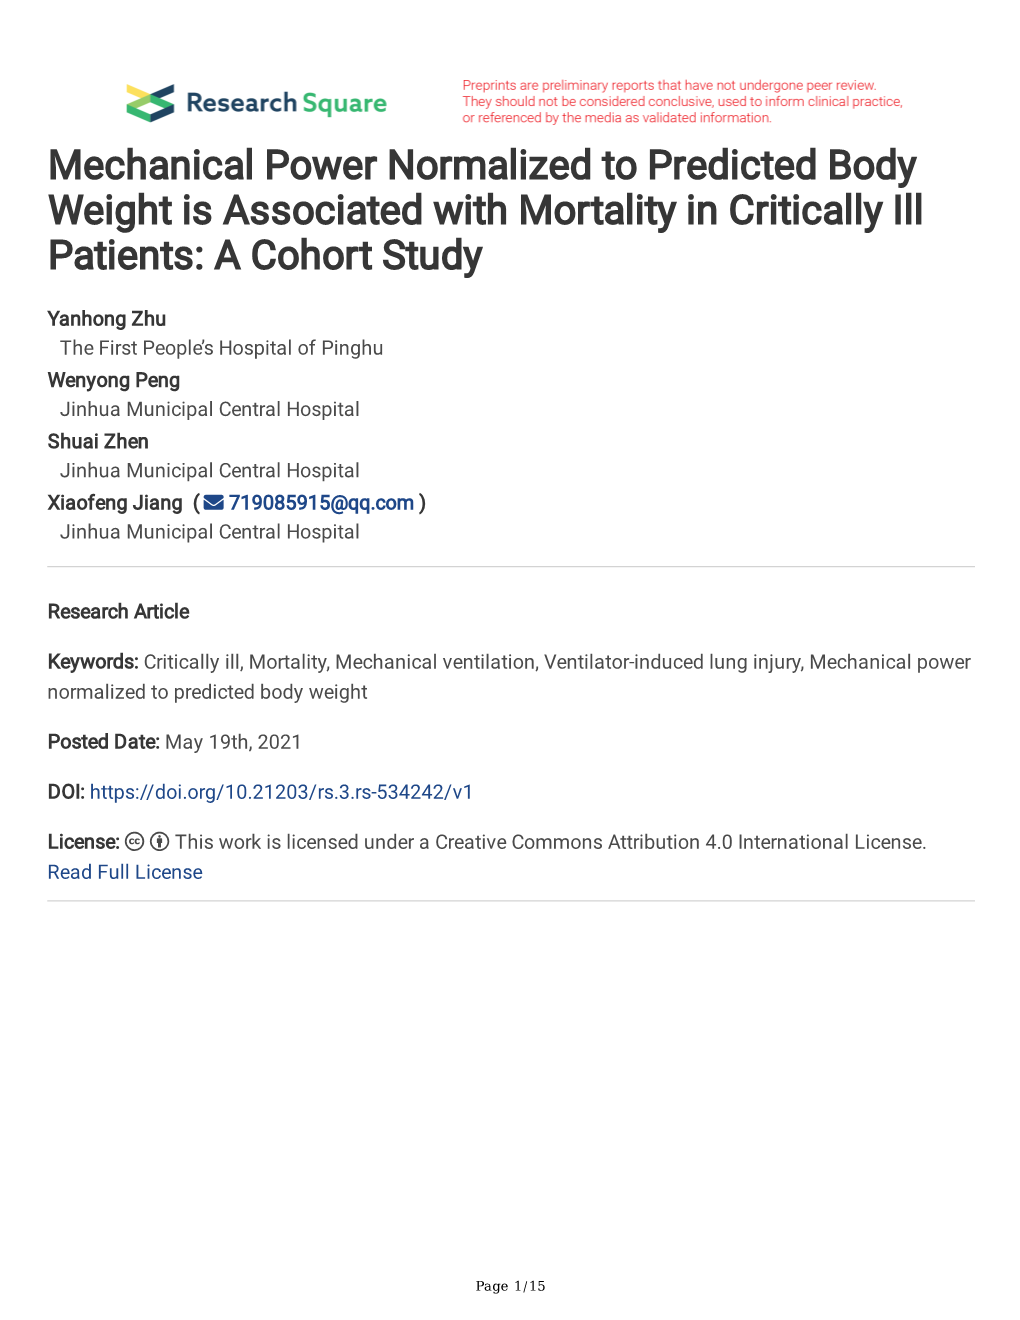 Mechanical Power Normalized to Predicted Body Weight Is Associated with Mortality in Critically Ill Patients: a Cohort Study